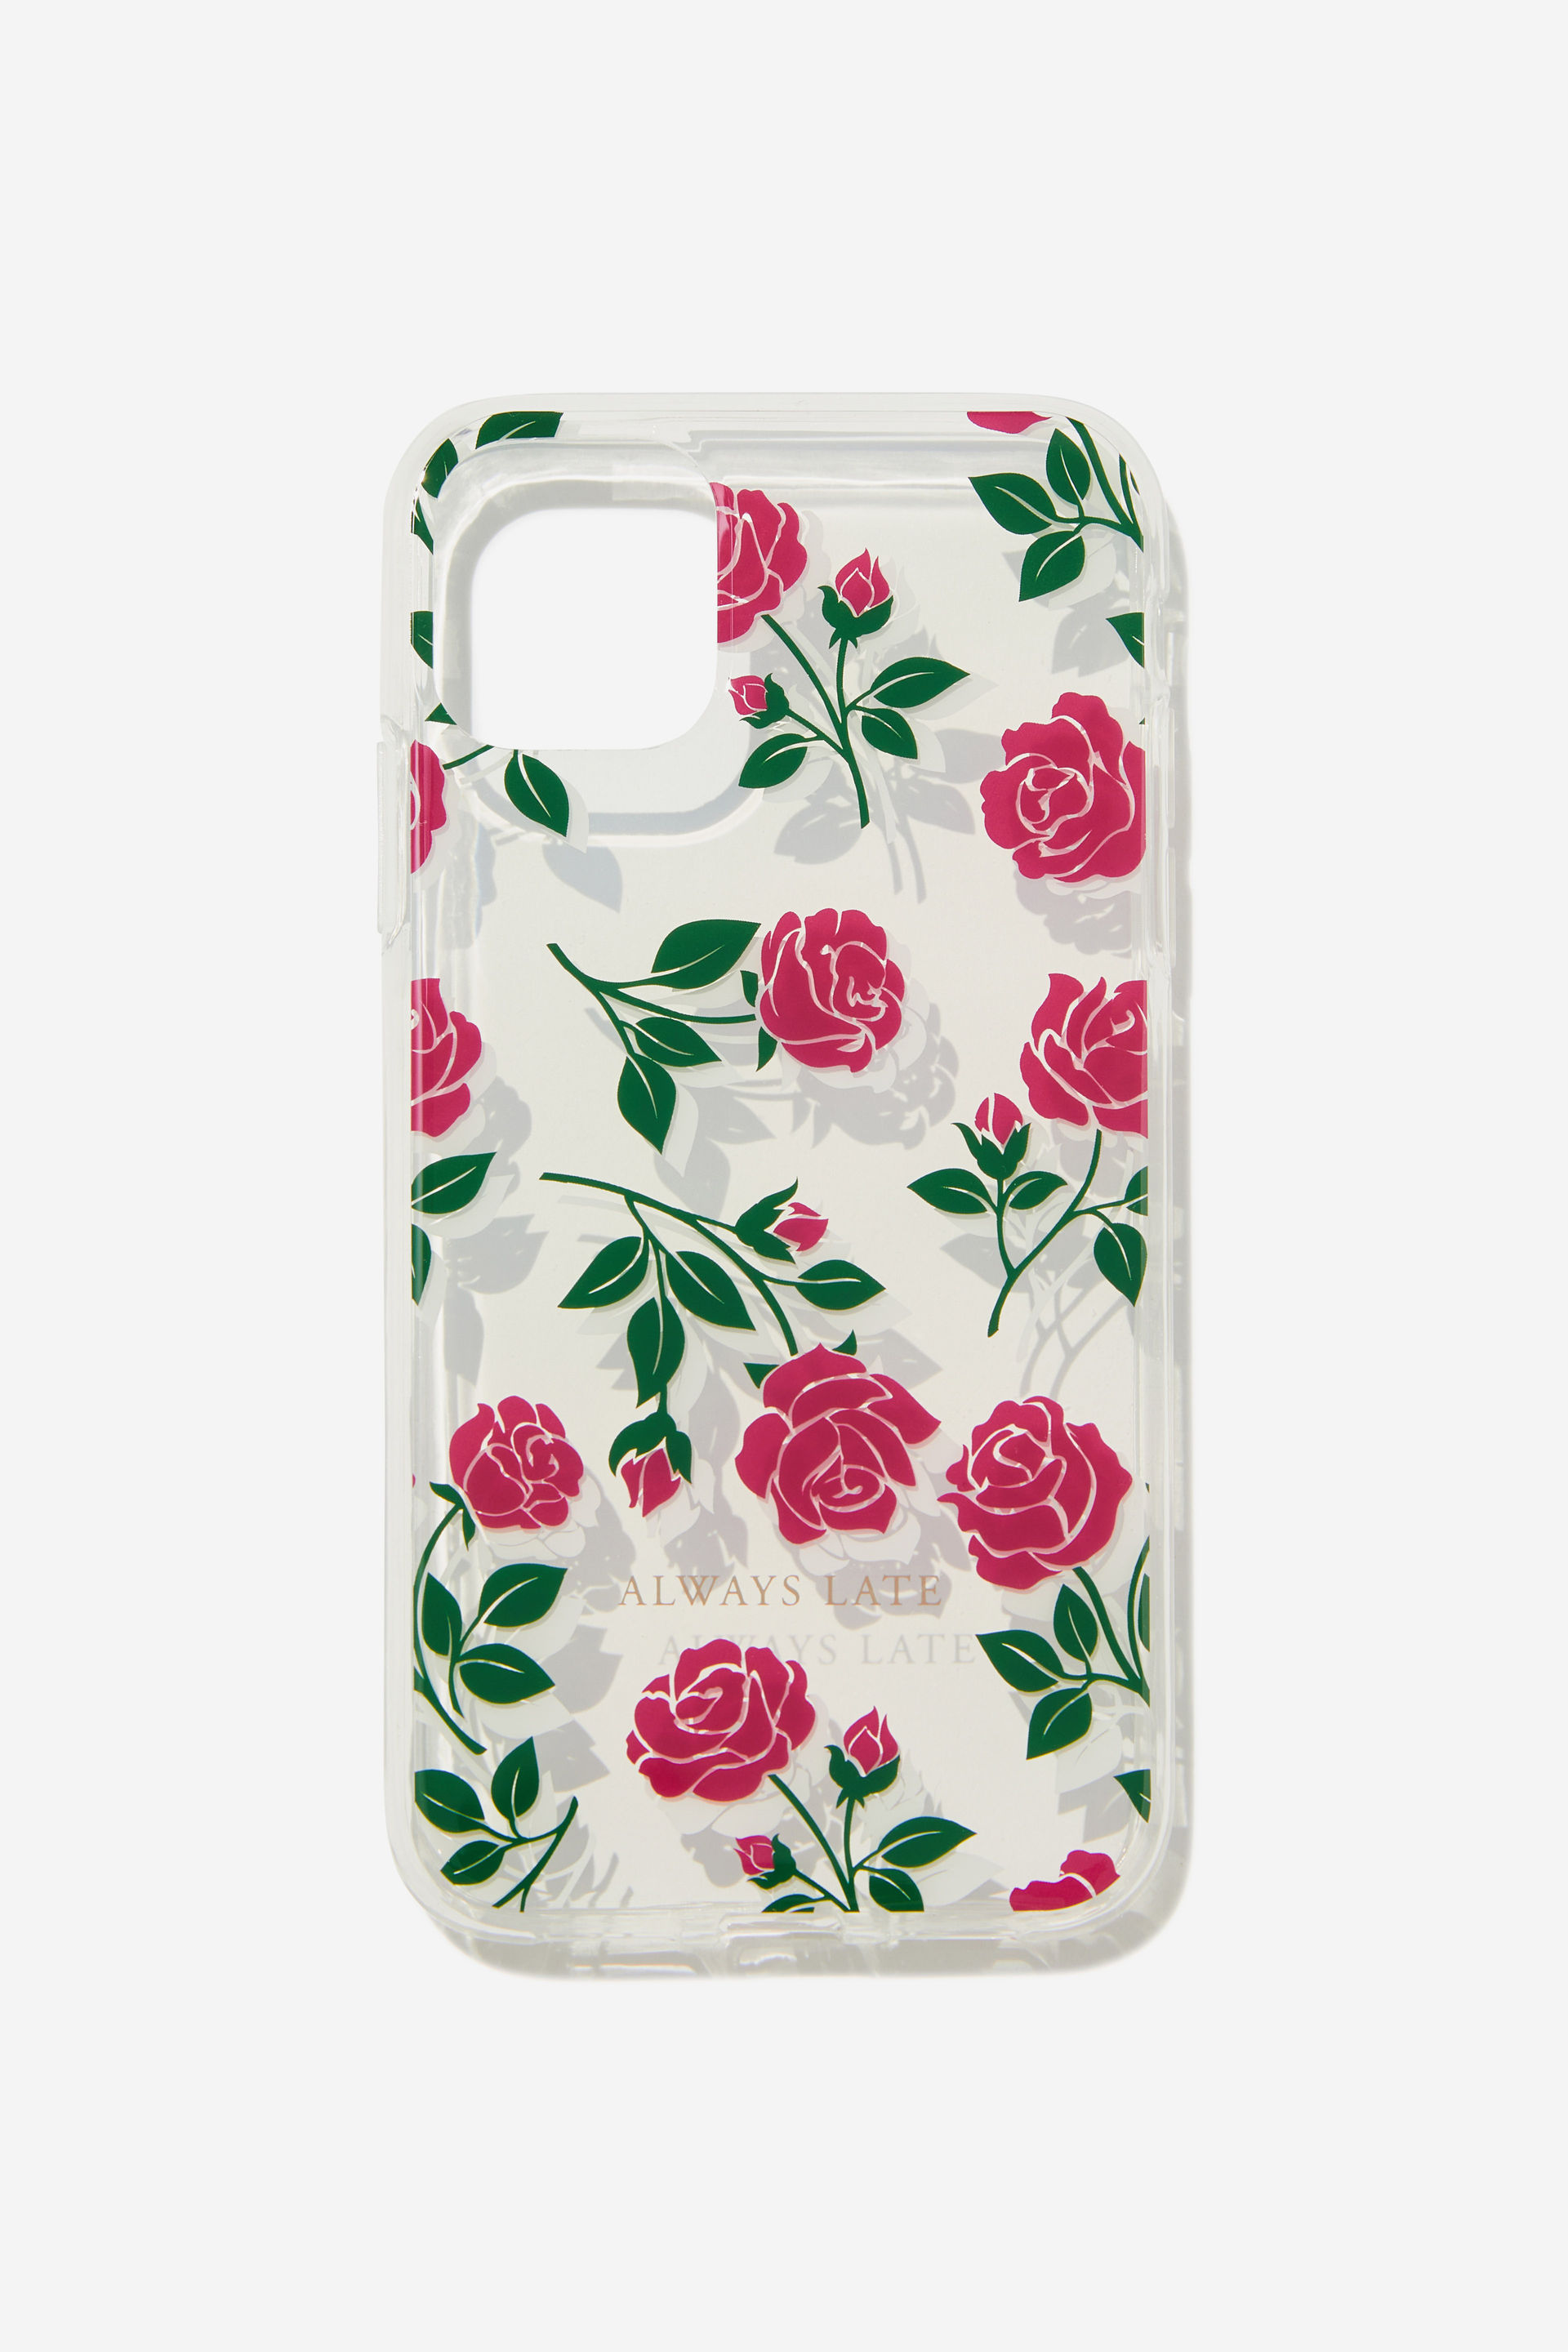 Typo - Graphic Phone Case Iphone 11 - Always late roses / clear